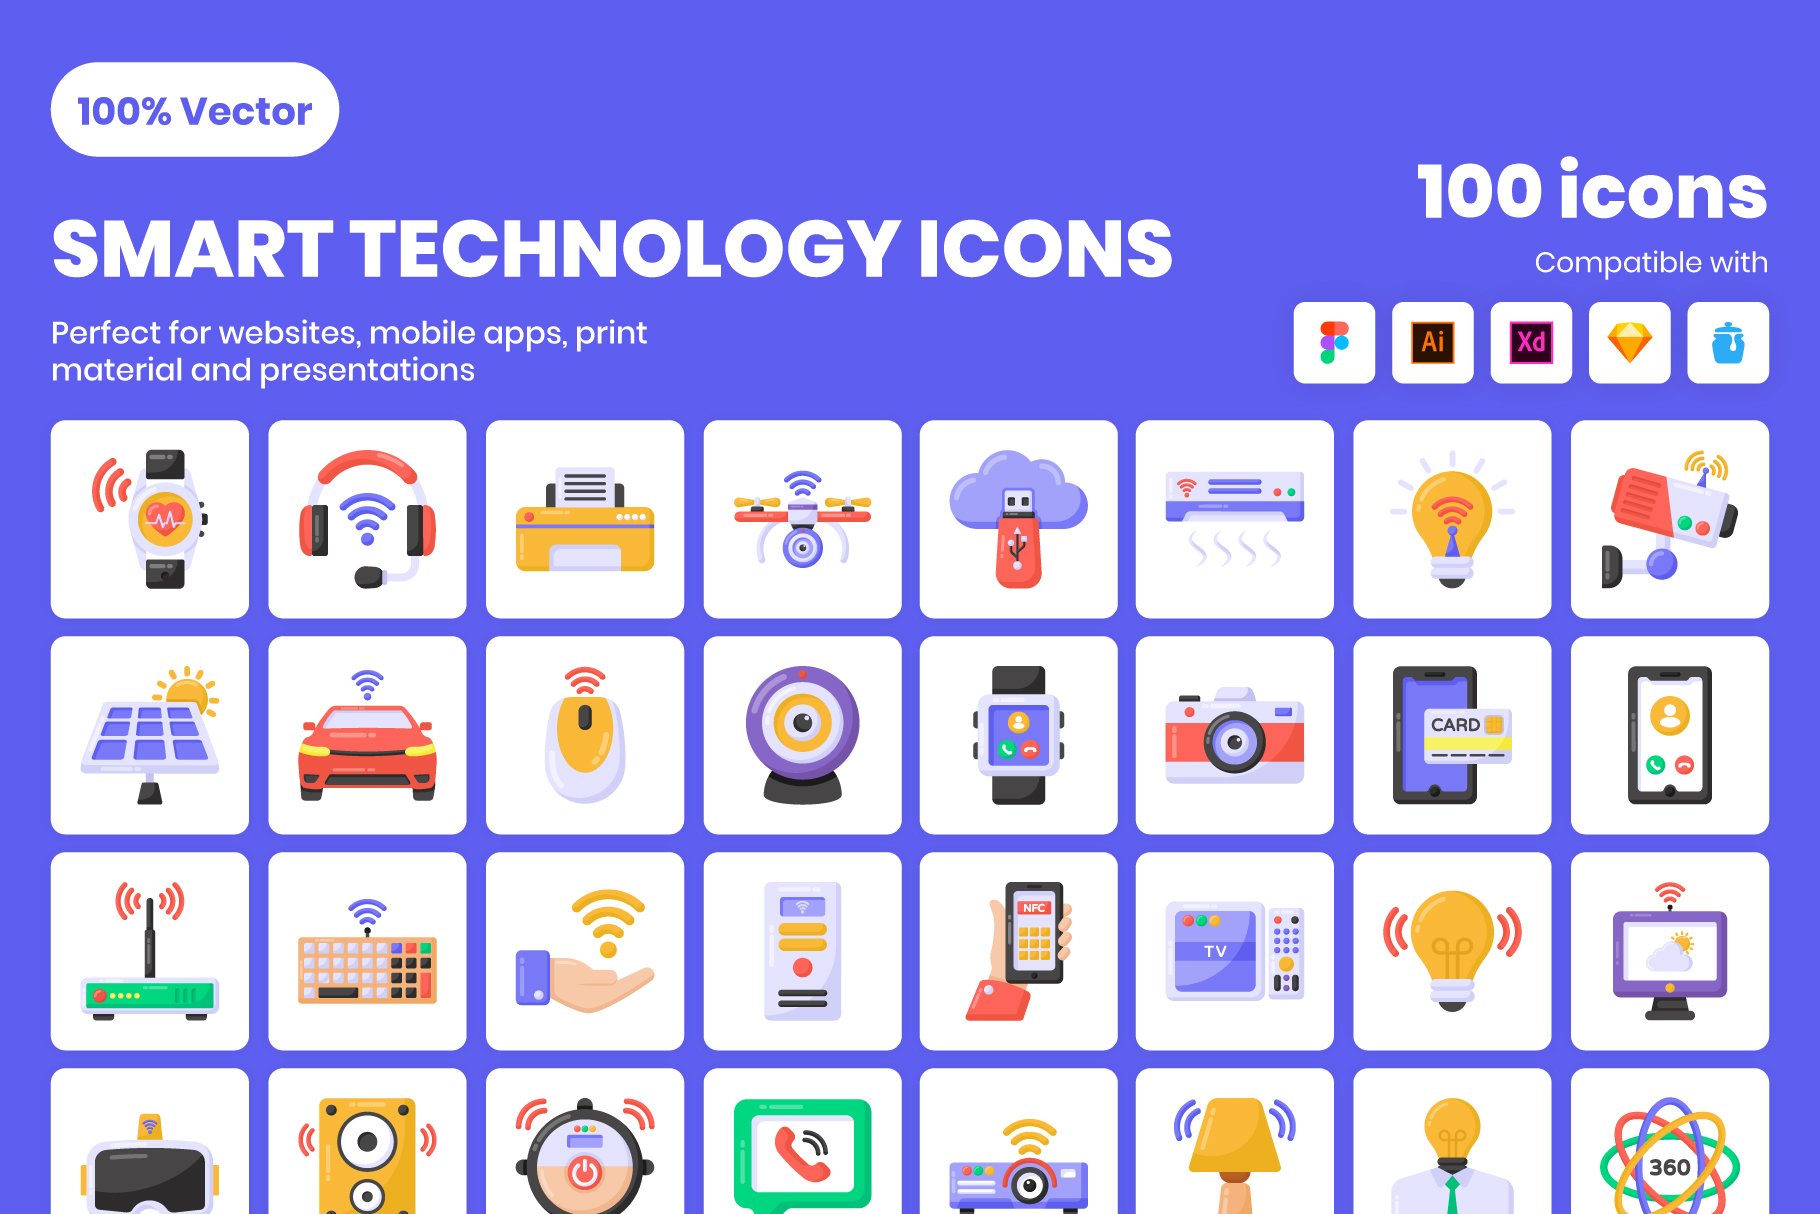 Smart Technology Icons - Vector icon cover image.